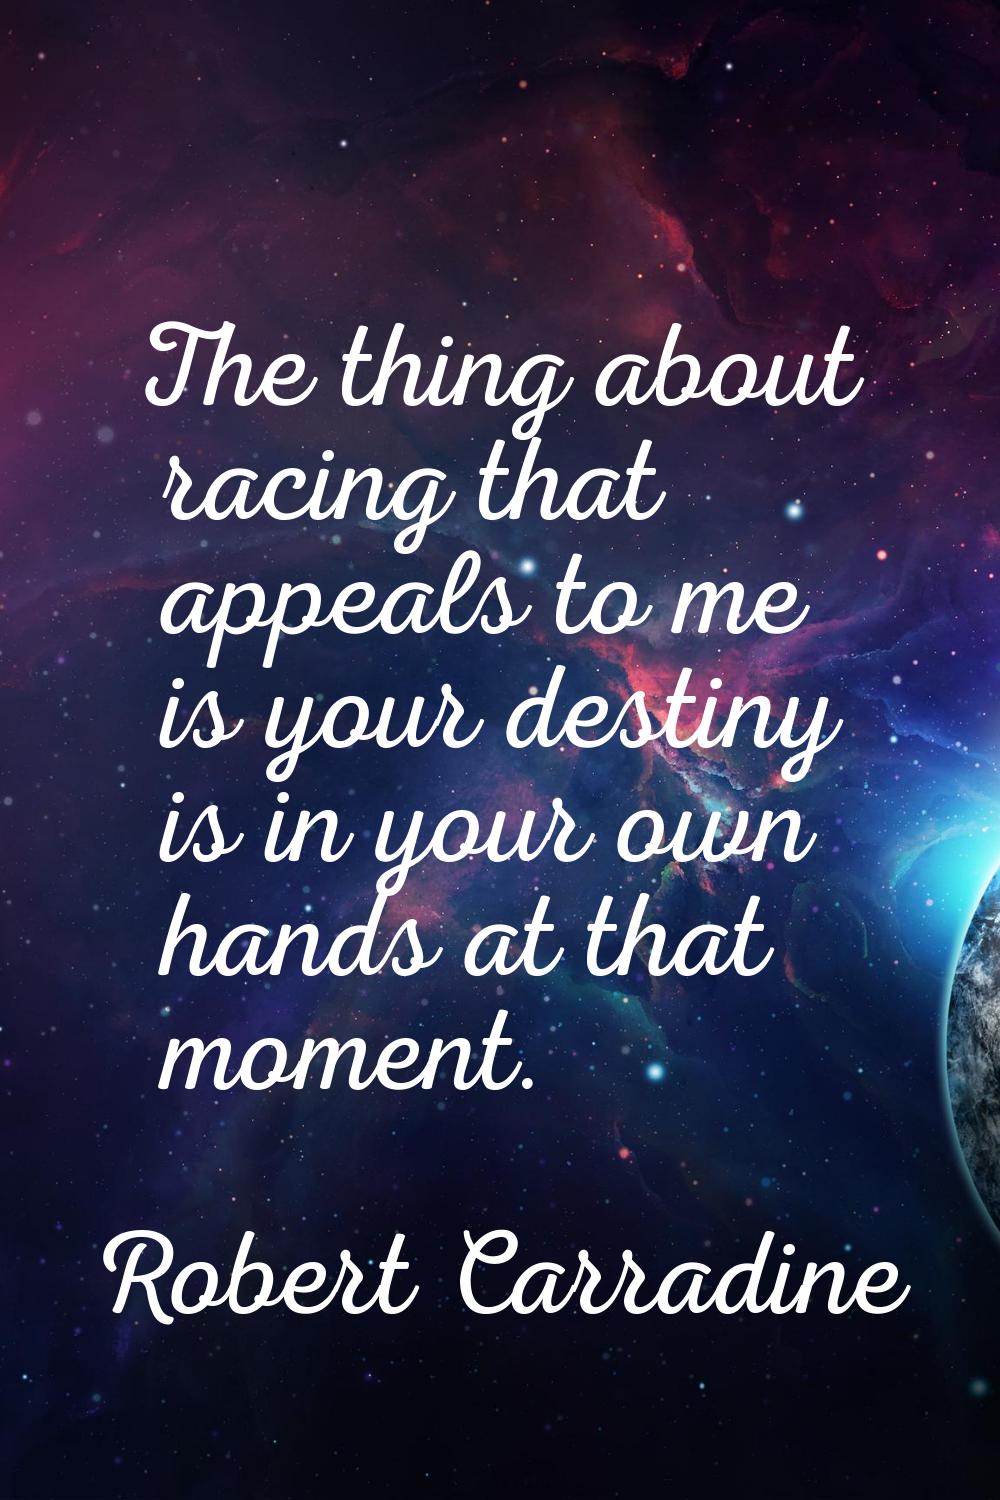 The thing about racing that appeals to me is your destiny is in your own hands at that moment.